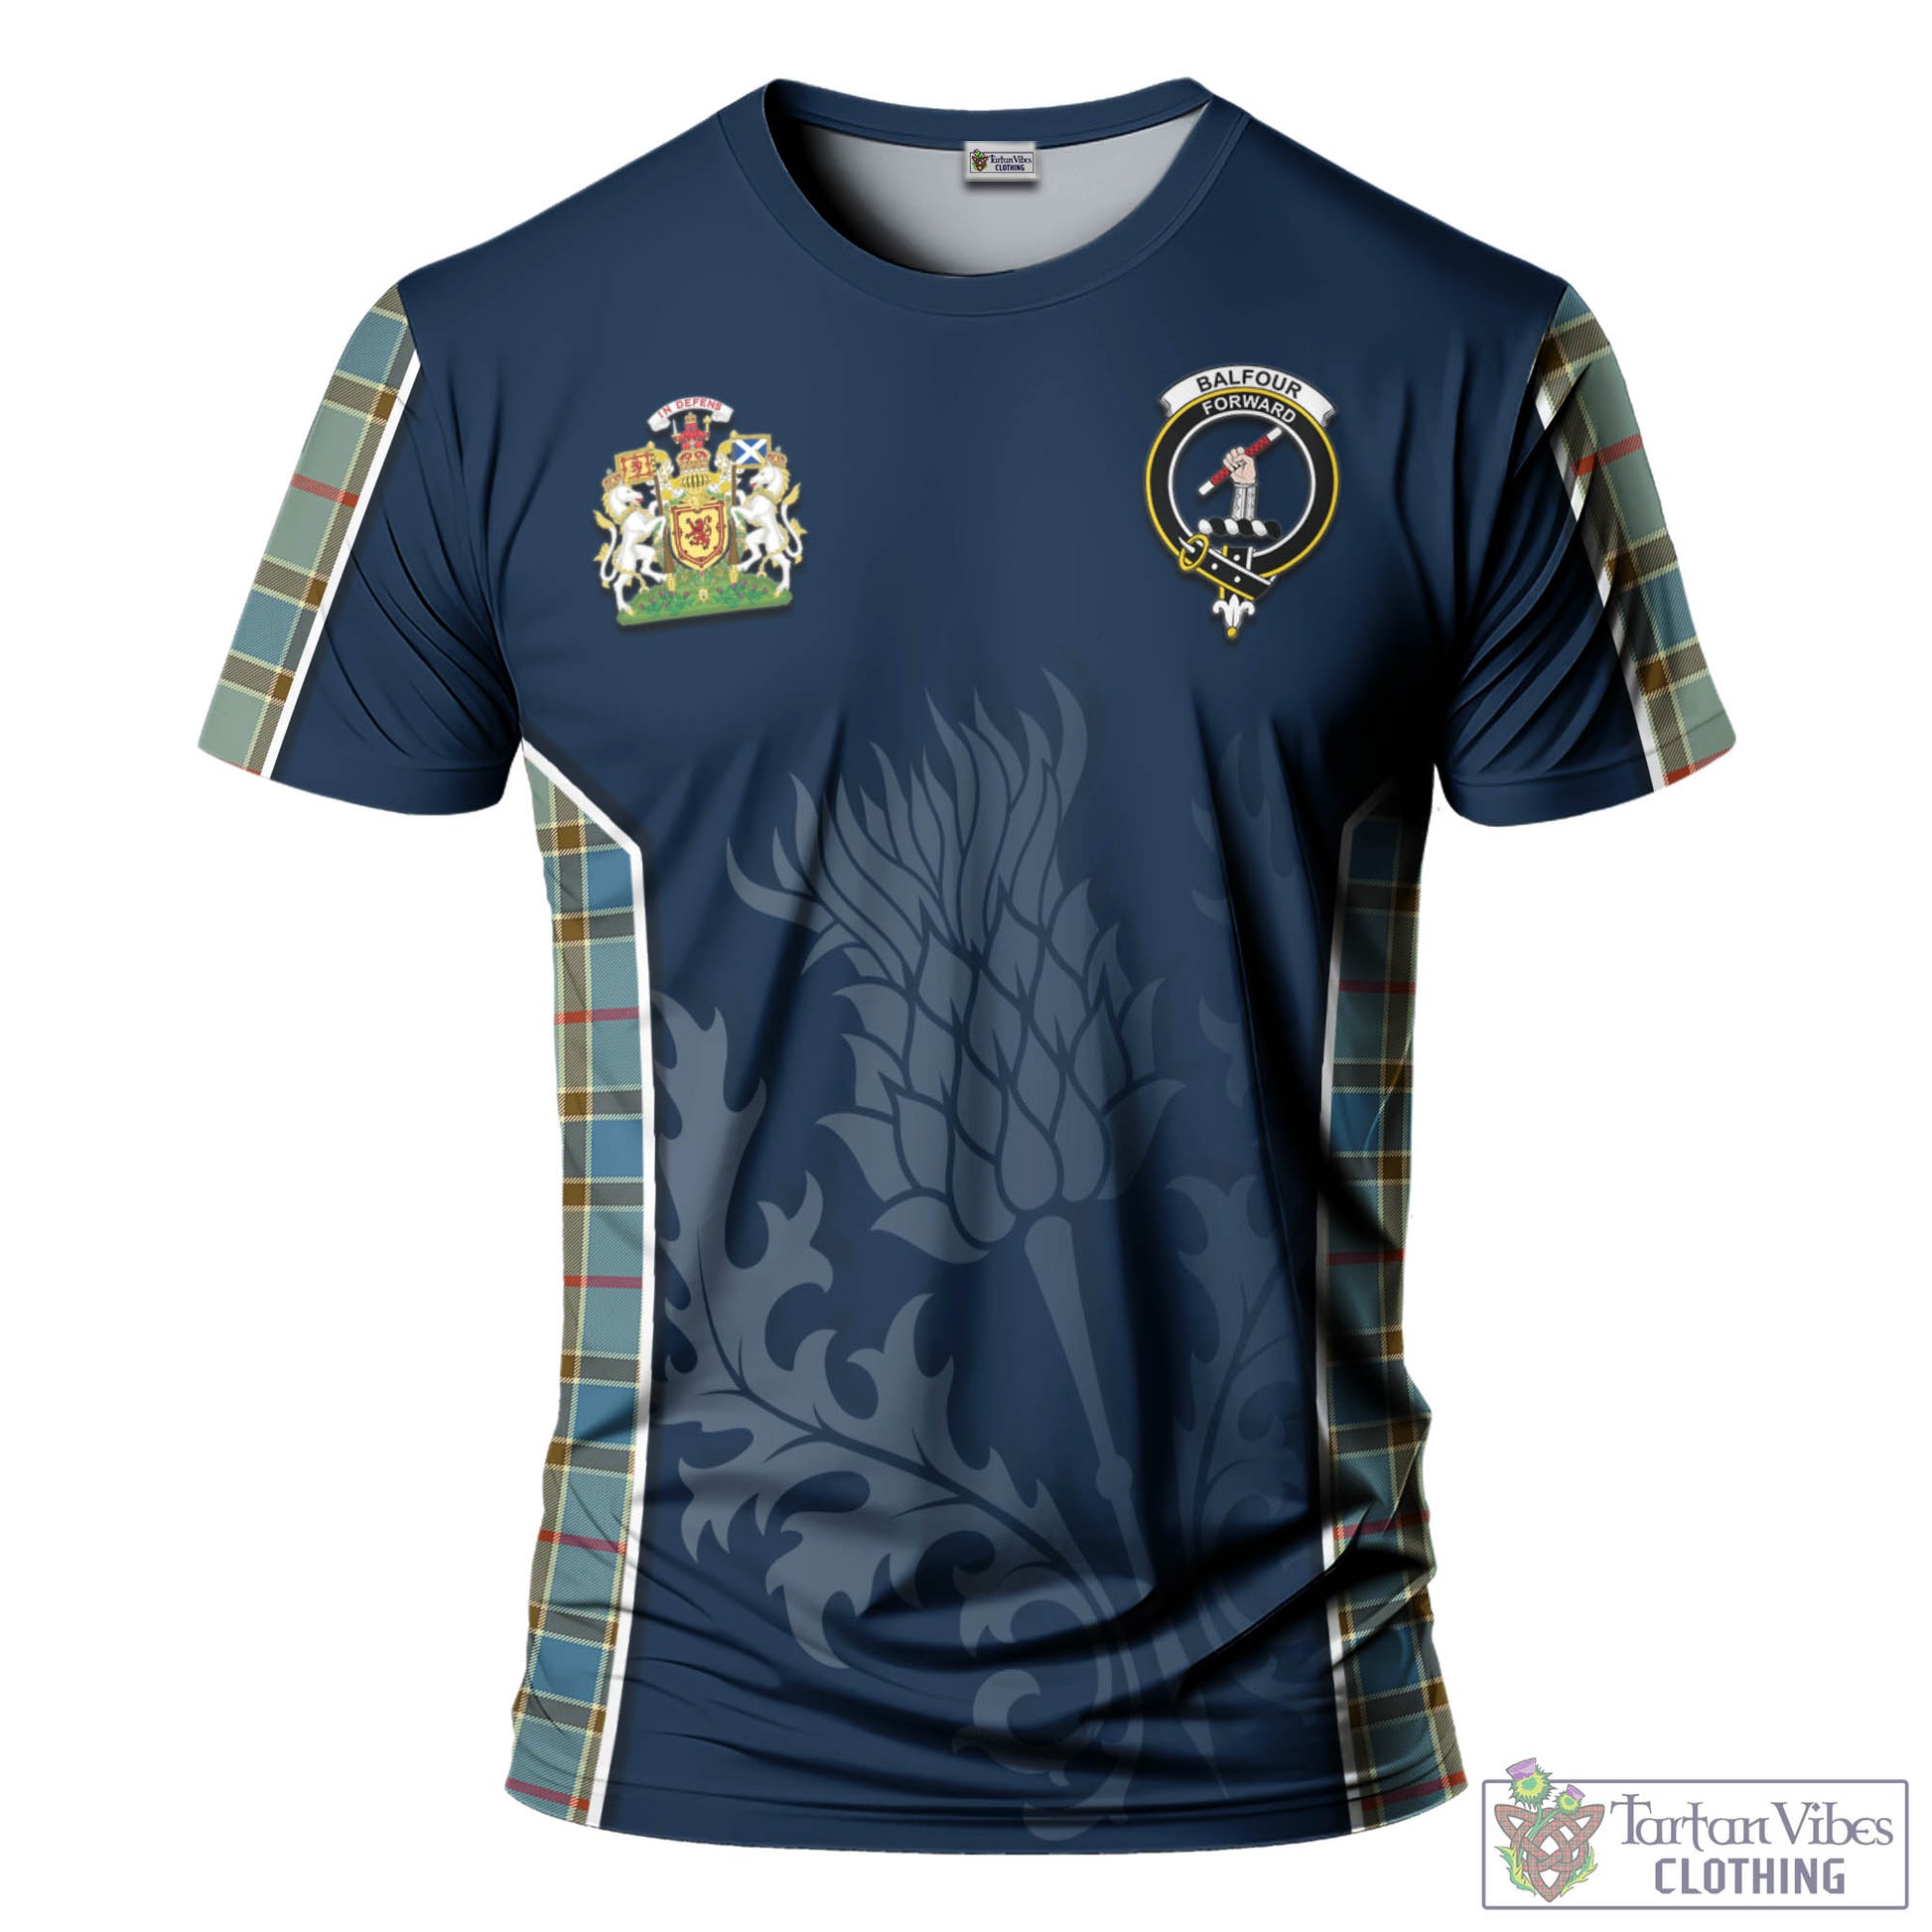 Tartan Vibes Clothing Balfour Blue Tartan T-Shirt with Family Crest and Scottish Thistle Vibes Sport Style